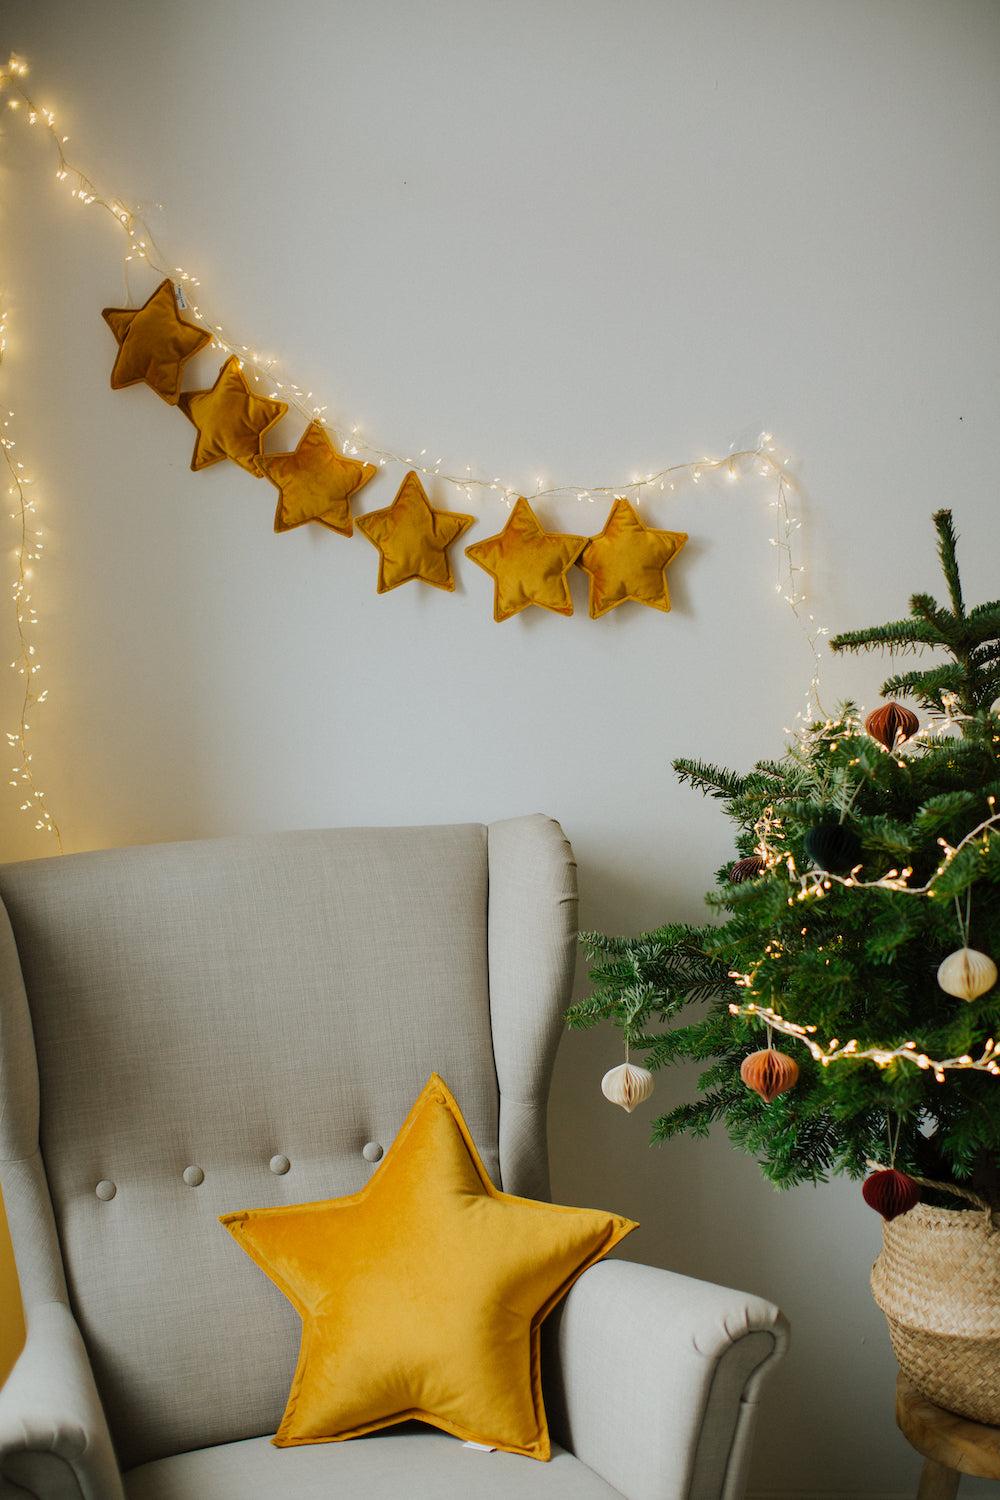 velvet star garland yellow by Bettys home over armchair with yellow star cushion next to christmas tree